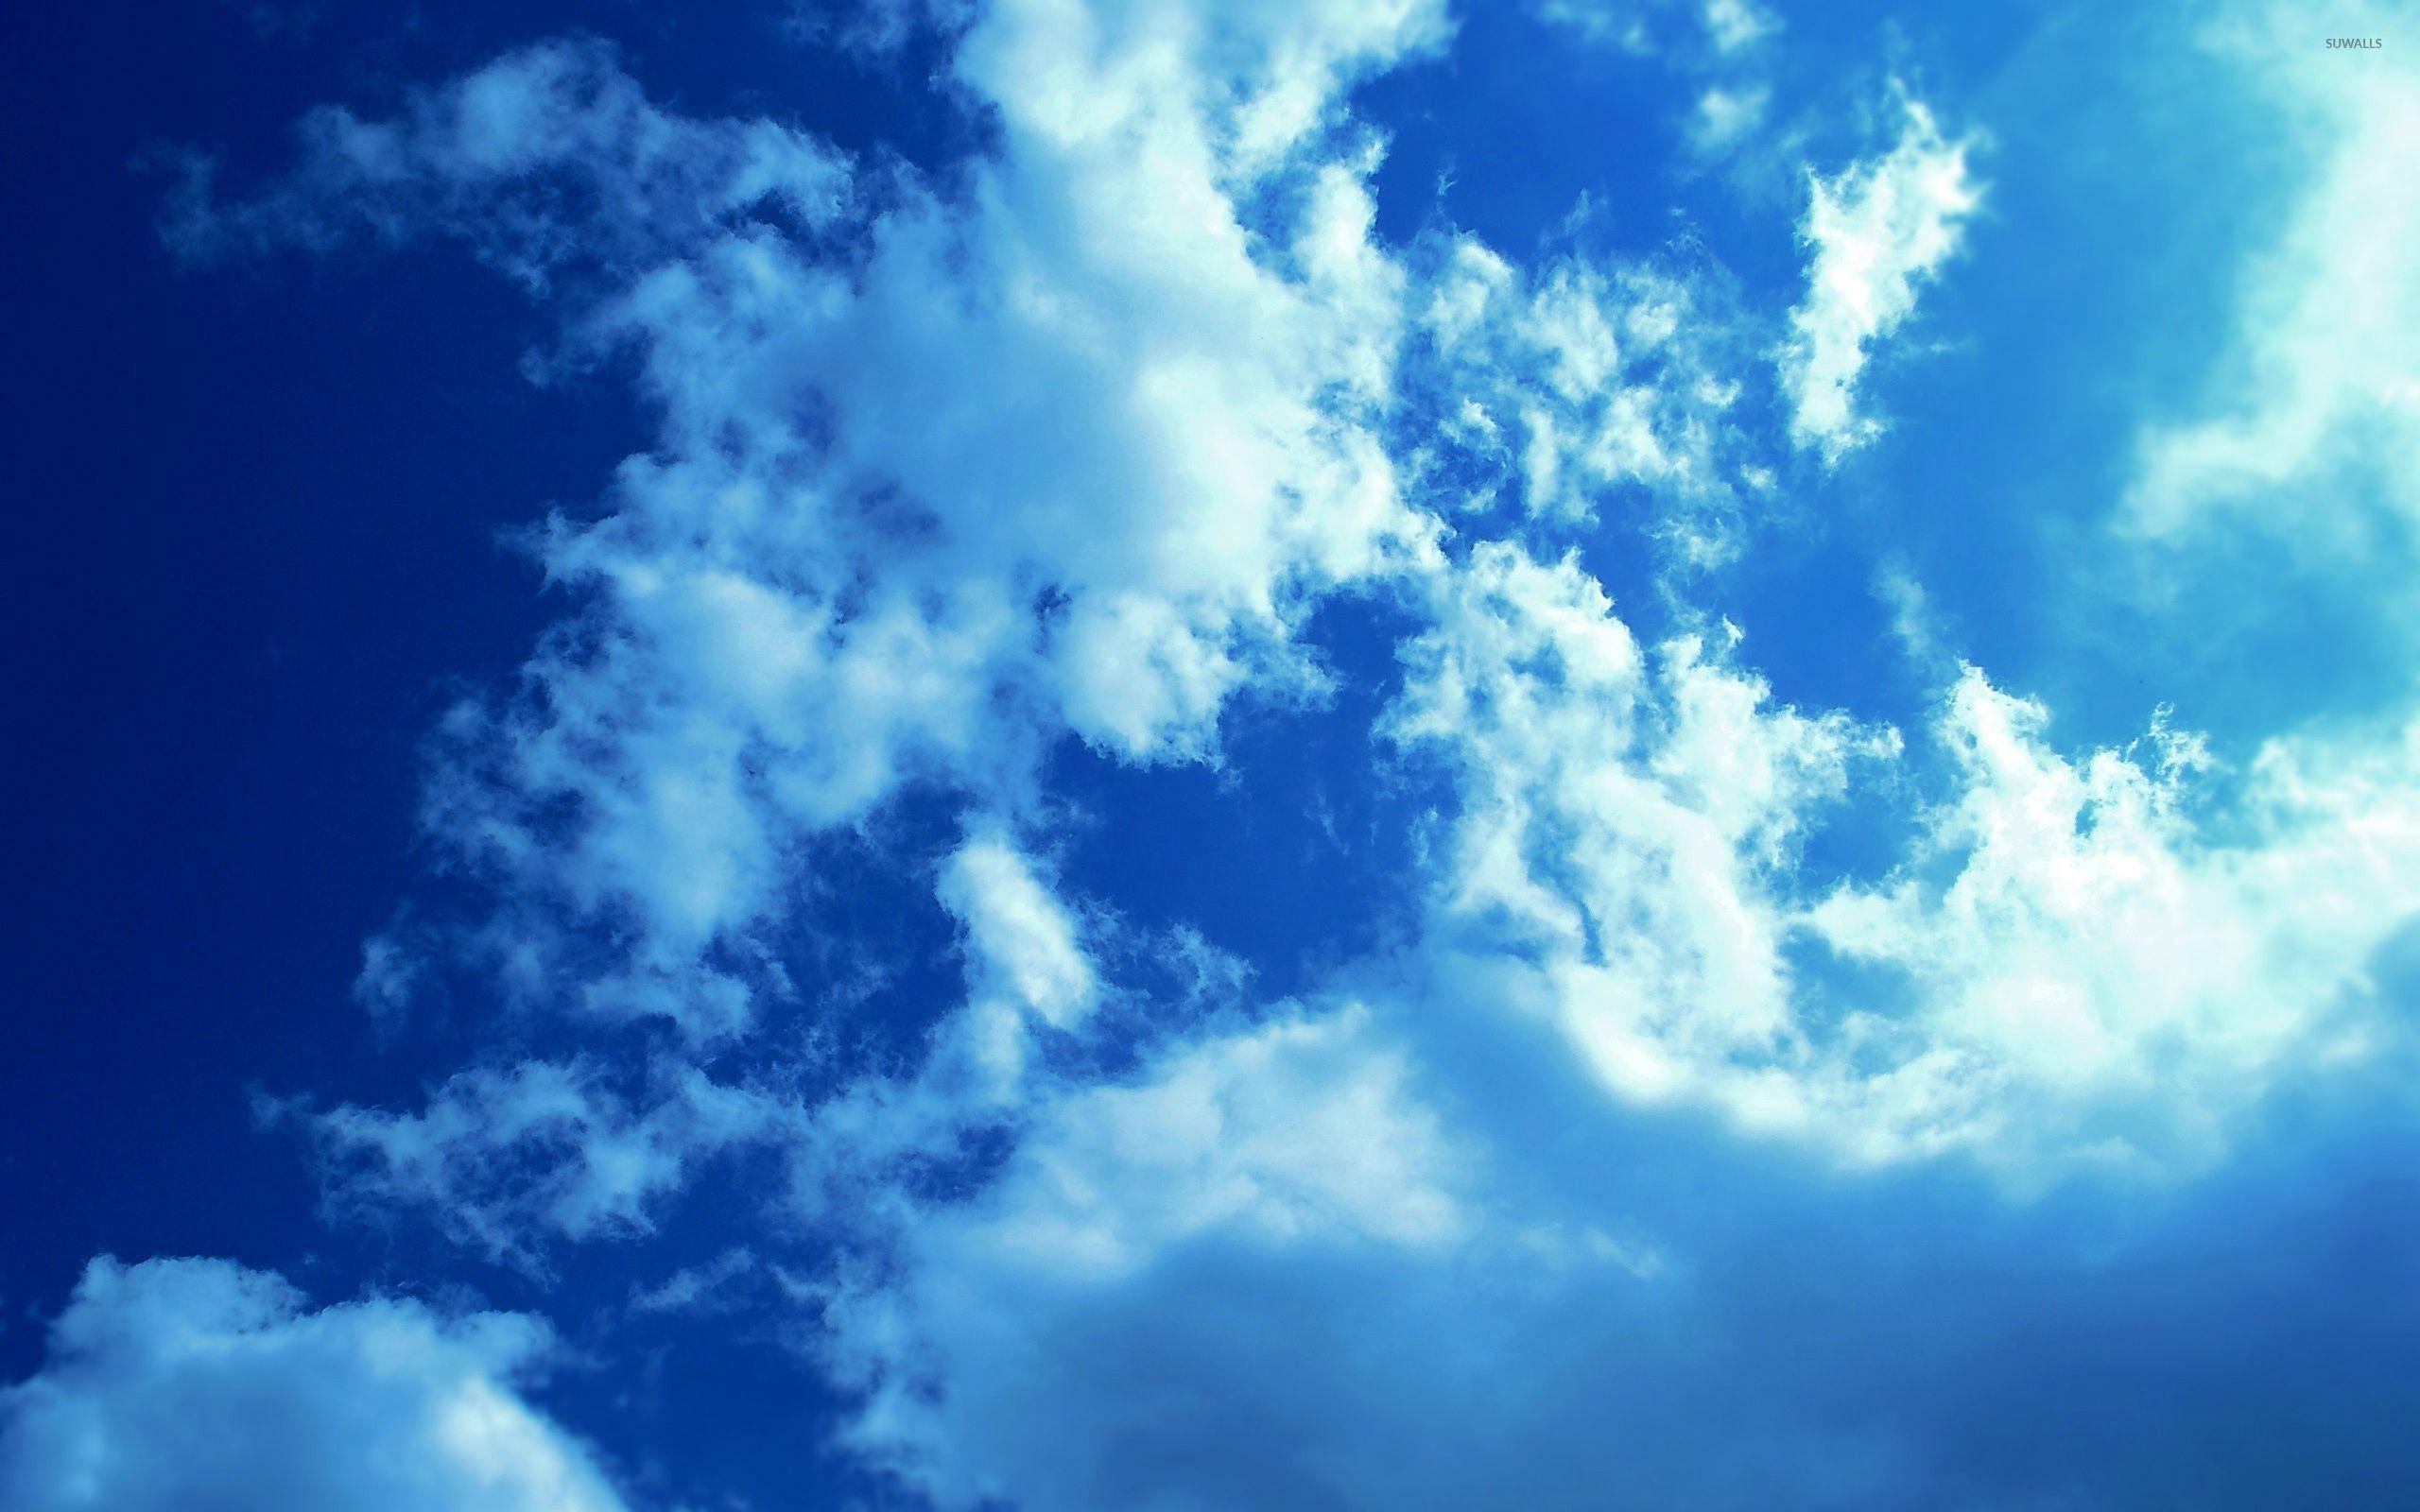 White clouds and blue sky wallpaper .suwalls.com